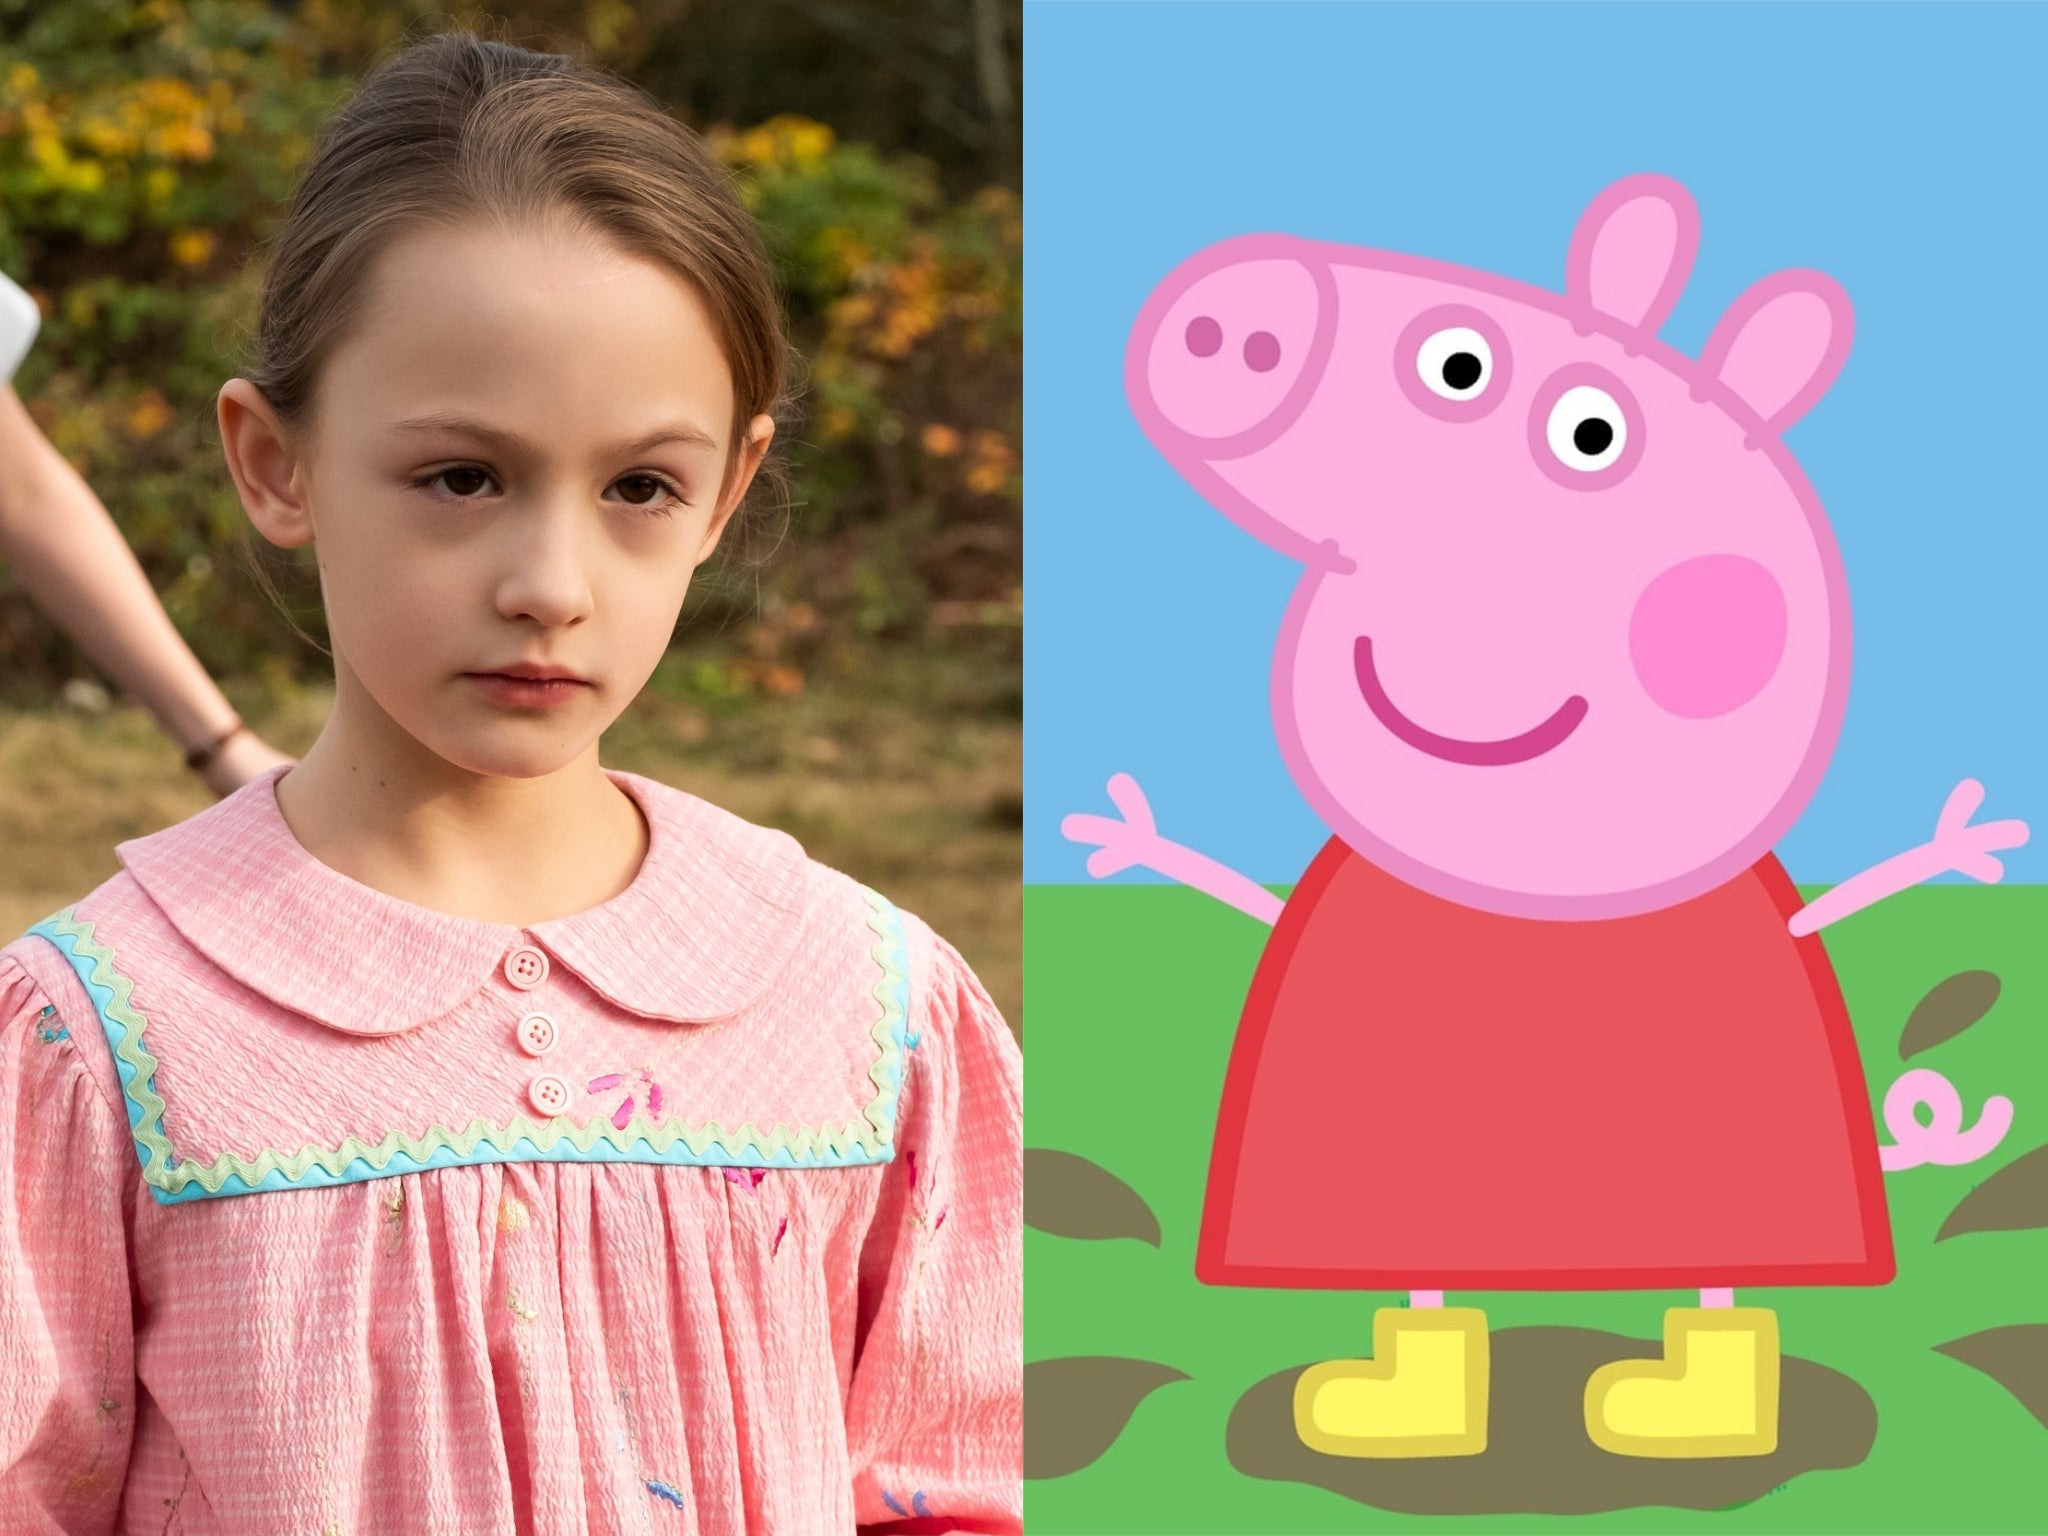 Scary Peppa Pig truth my BFFAEAEAEAE  Rory  told me this our account  is WinterRory on Vimeo